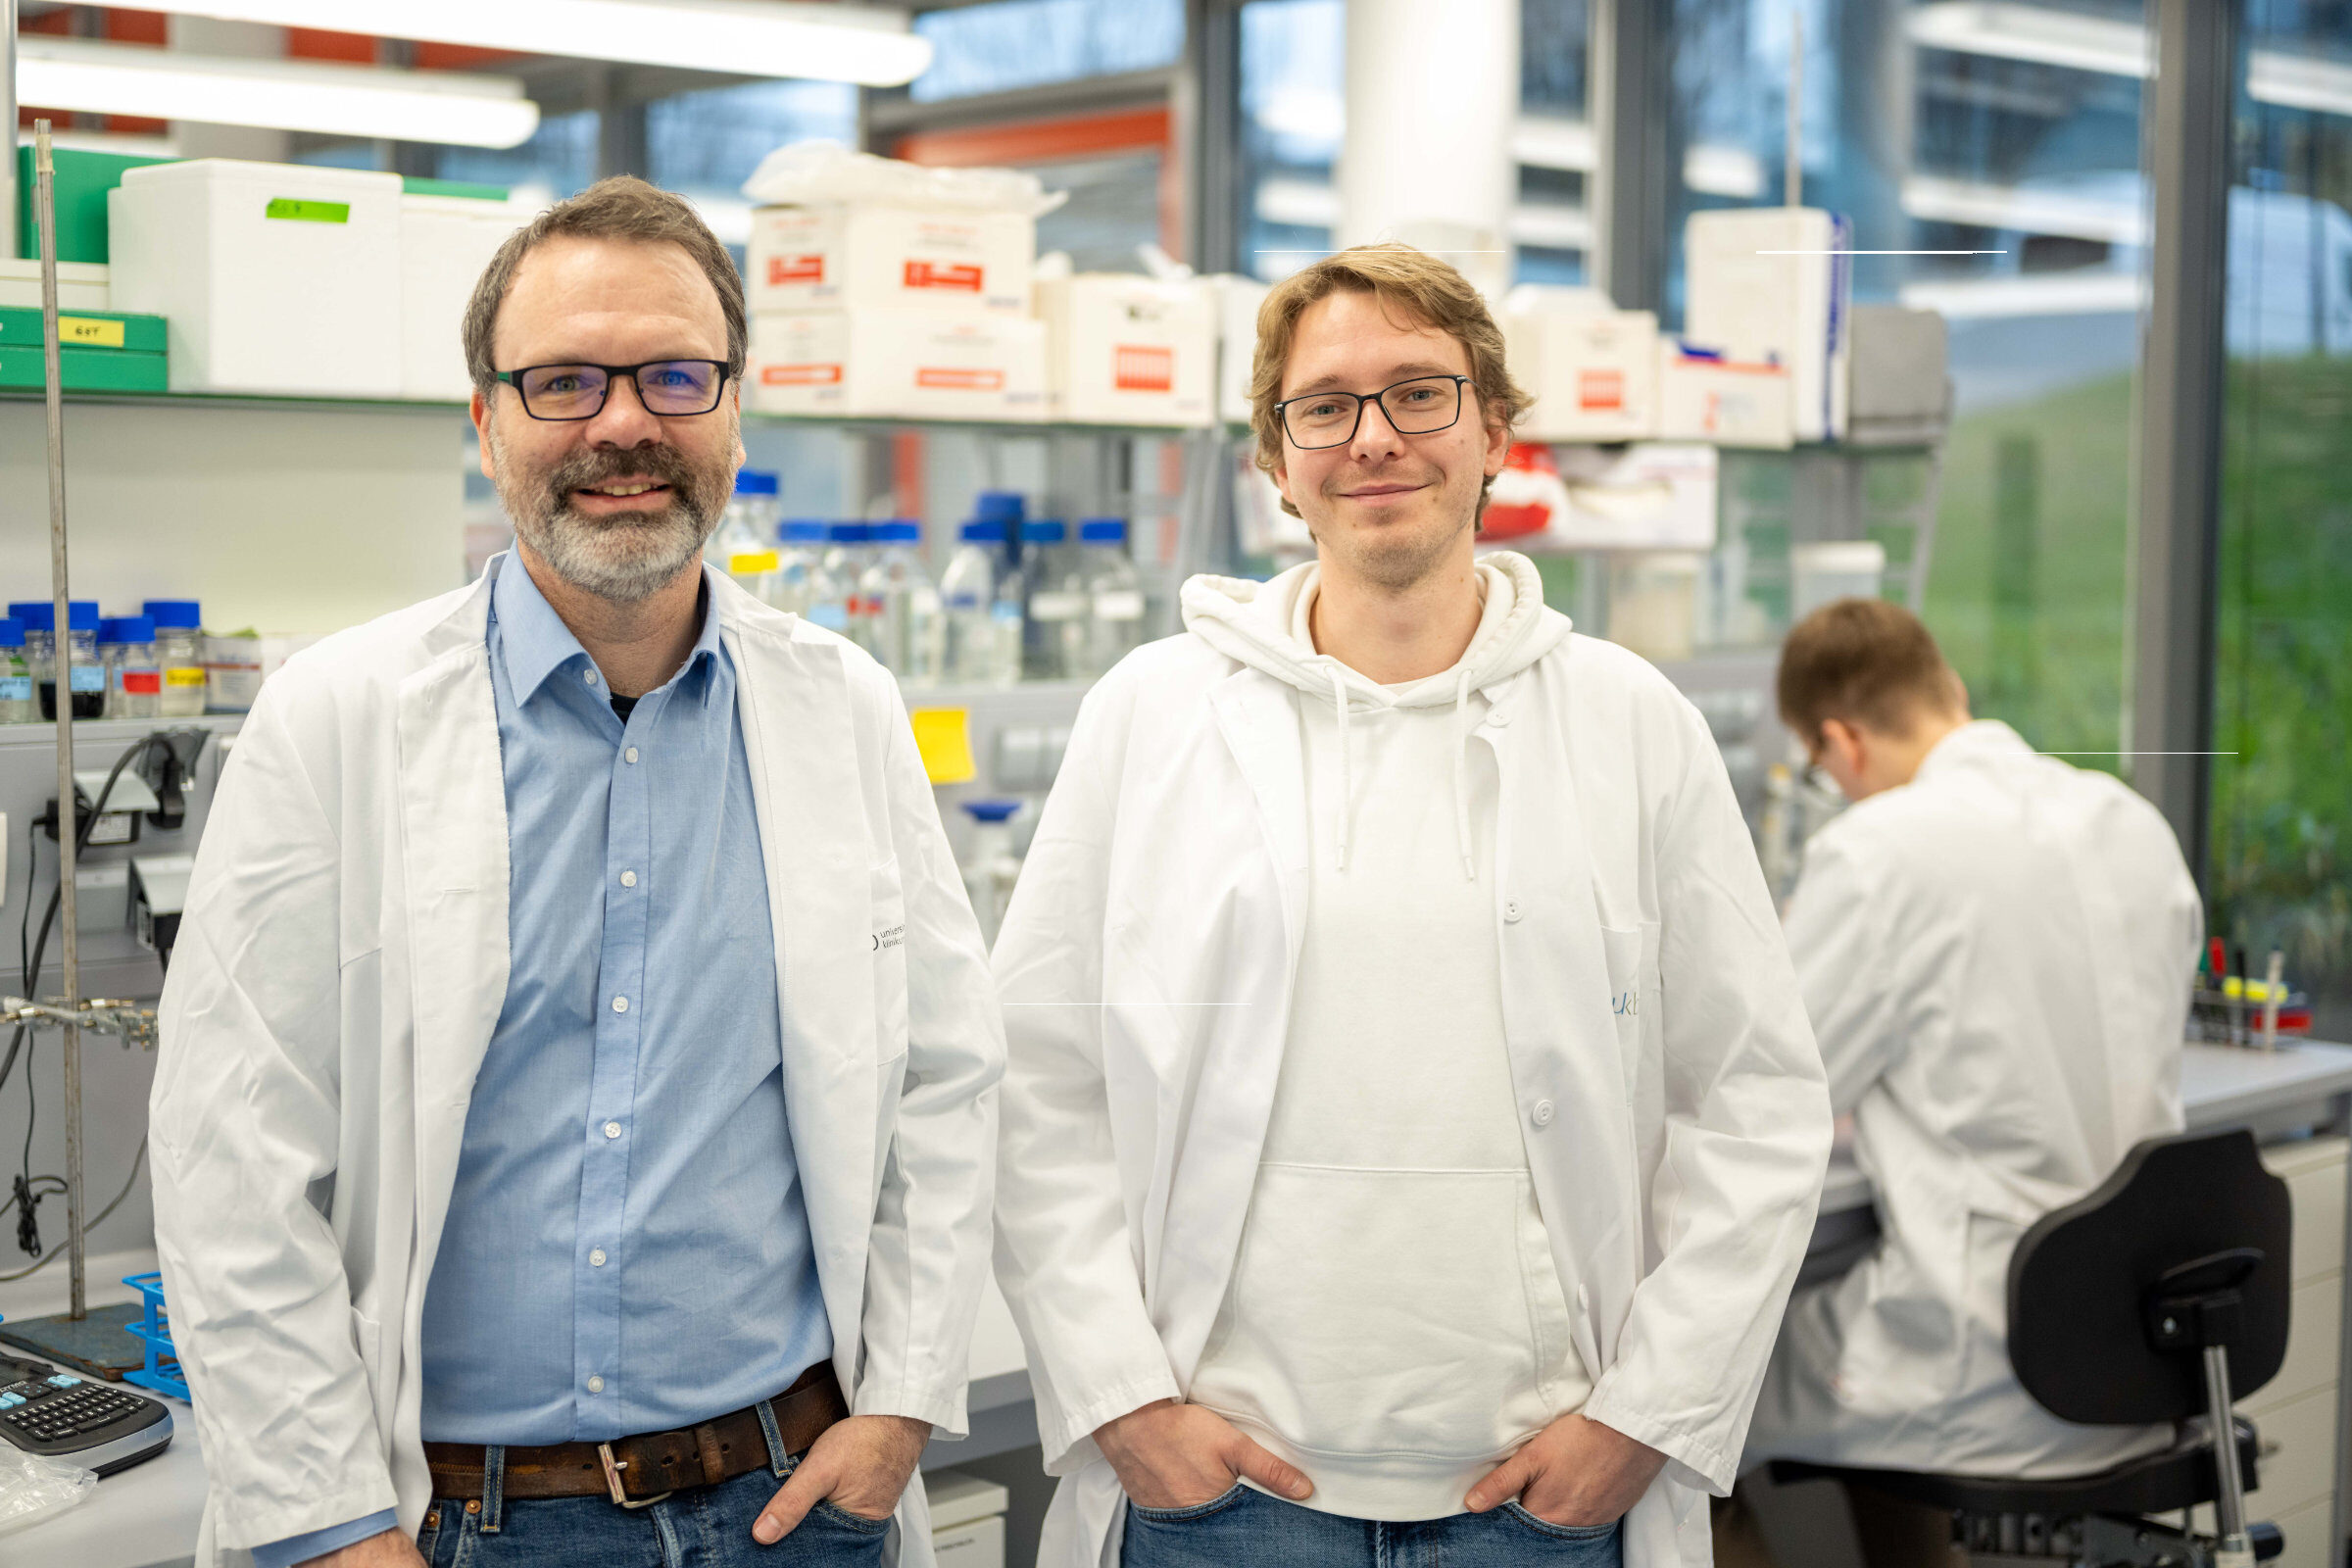 Scientists from the University Hospital Bonn and the University of Bonn discover an important membrane transport mechanism in pathogenic bacteria. PD Dr. Gregor Hagelueken (left) and Philipp Hendricks (right) are part of the research team.